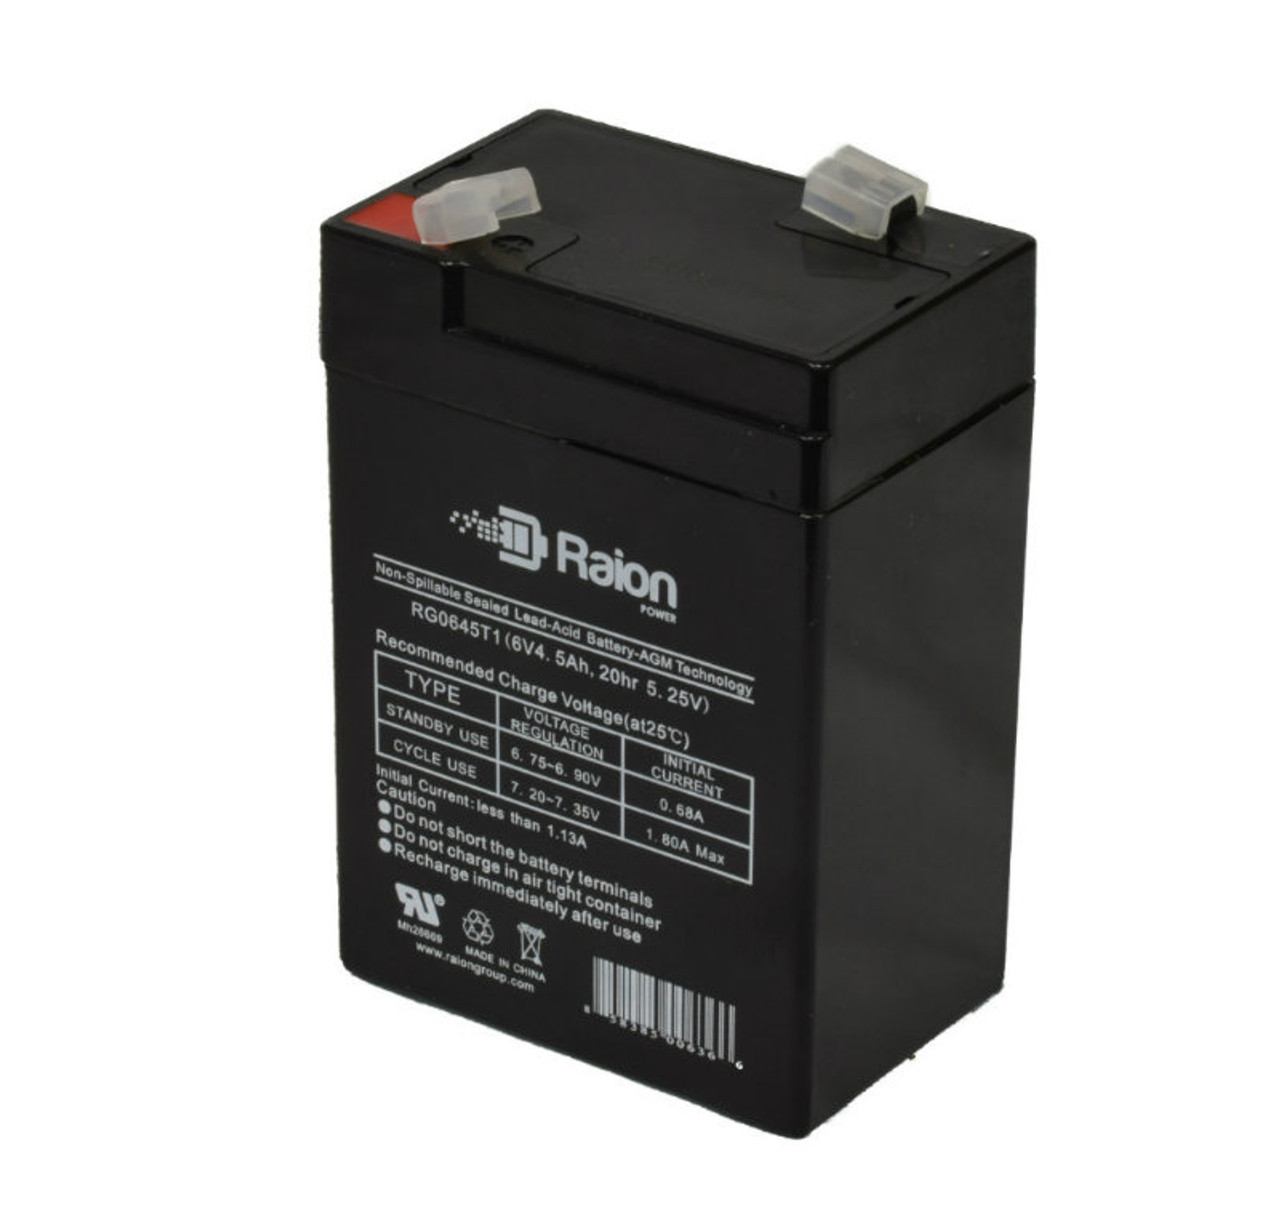 Raion Power RG0645T1 6V 4.5Ah Replacement Battery Cartridge for LongWay 3FM4.2